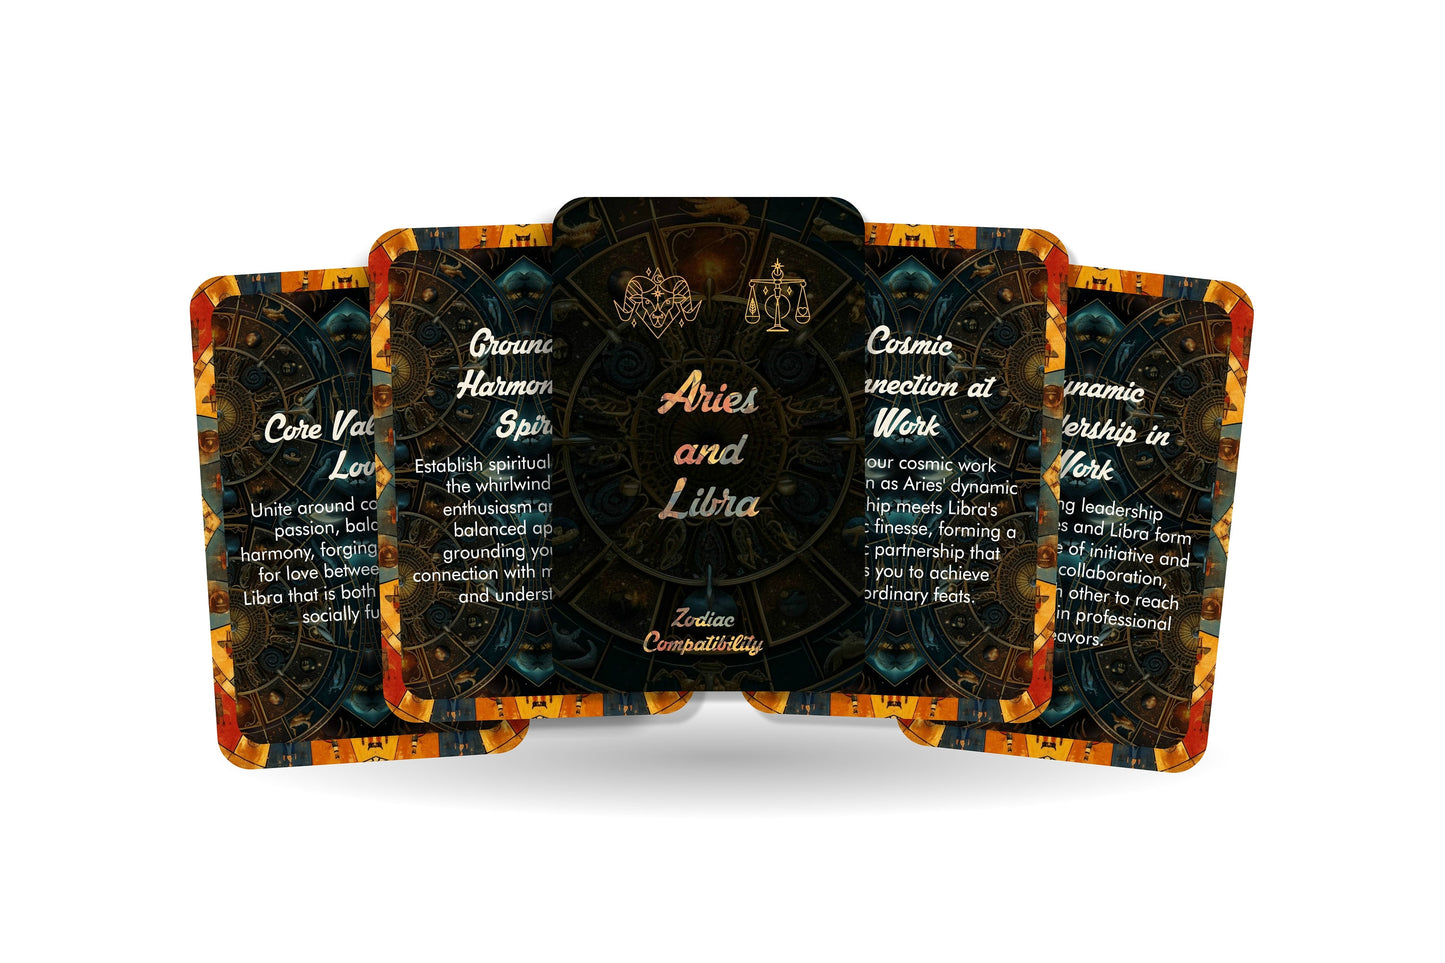 Aries and Libra - Zodiac Compatibility - Divination tools - Oracle cards - Star Sign Compatibility - Horoscope Compatibility Cards